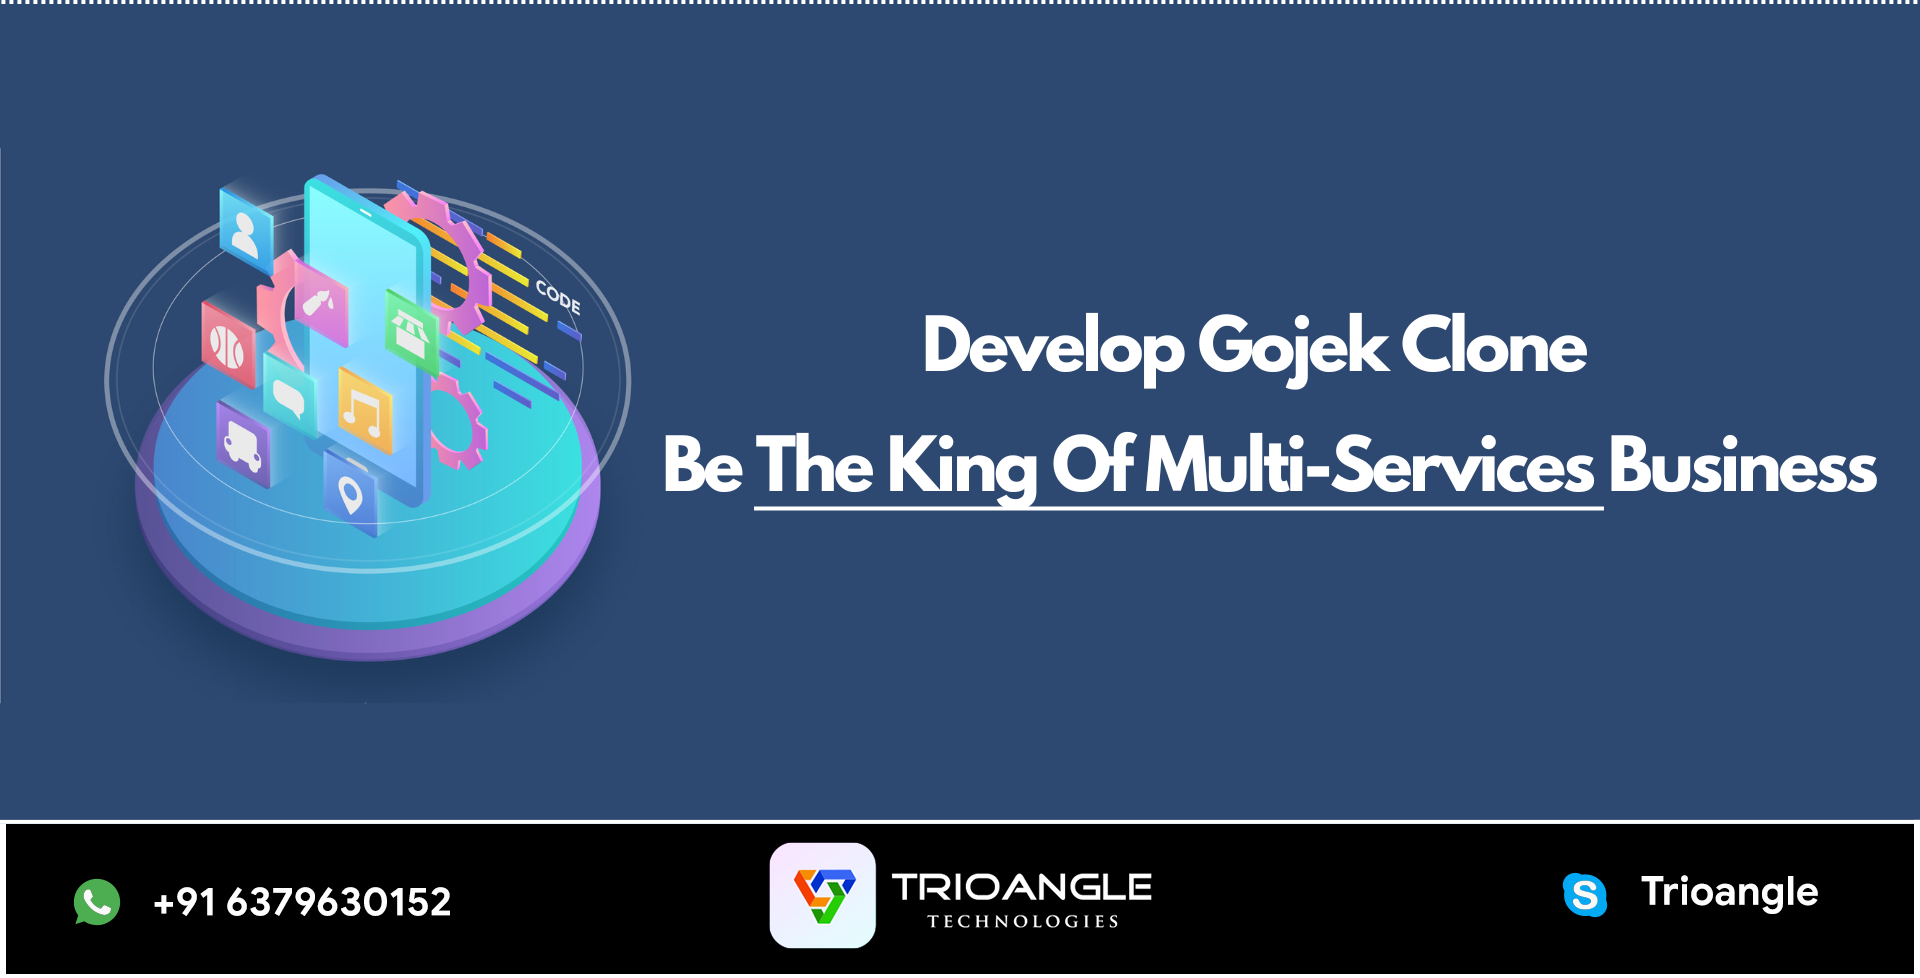 Develop Gojek Clone: Be The King Of Multi-Services Business